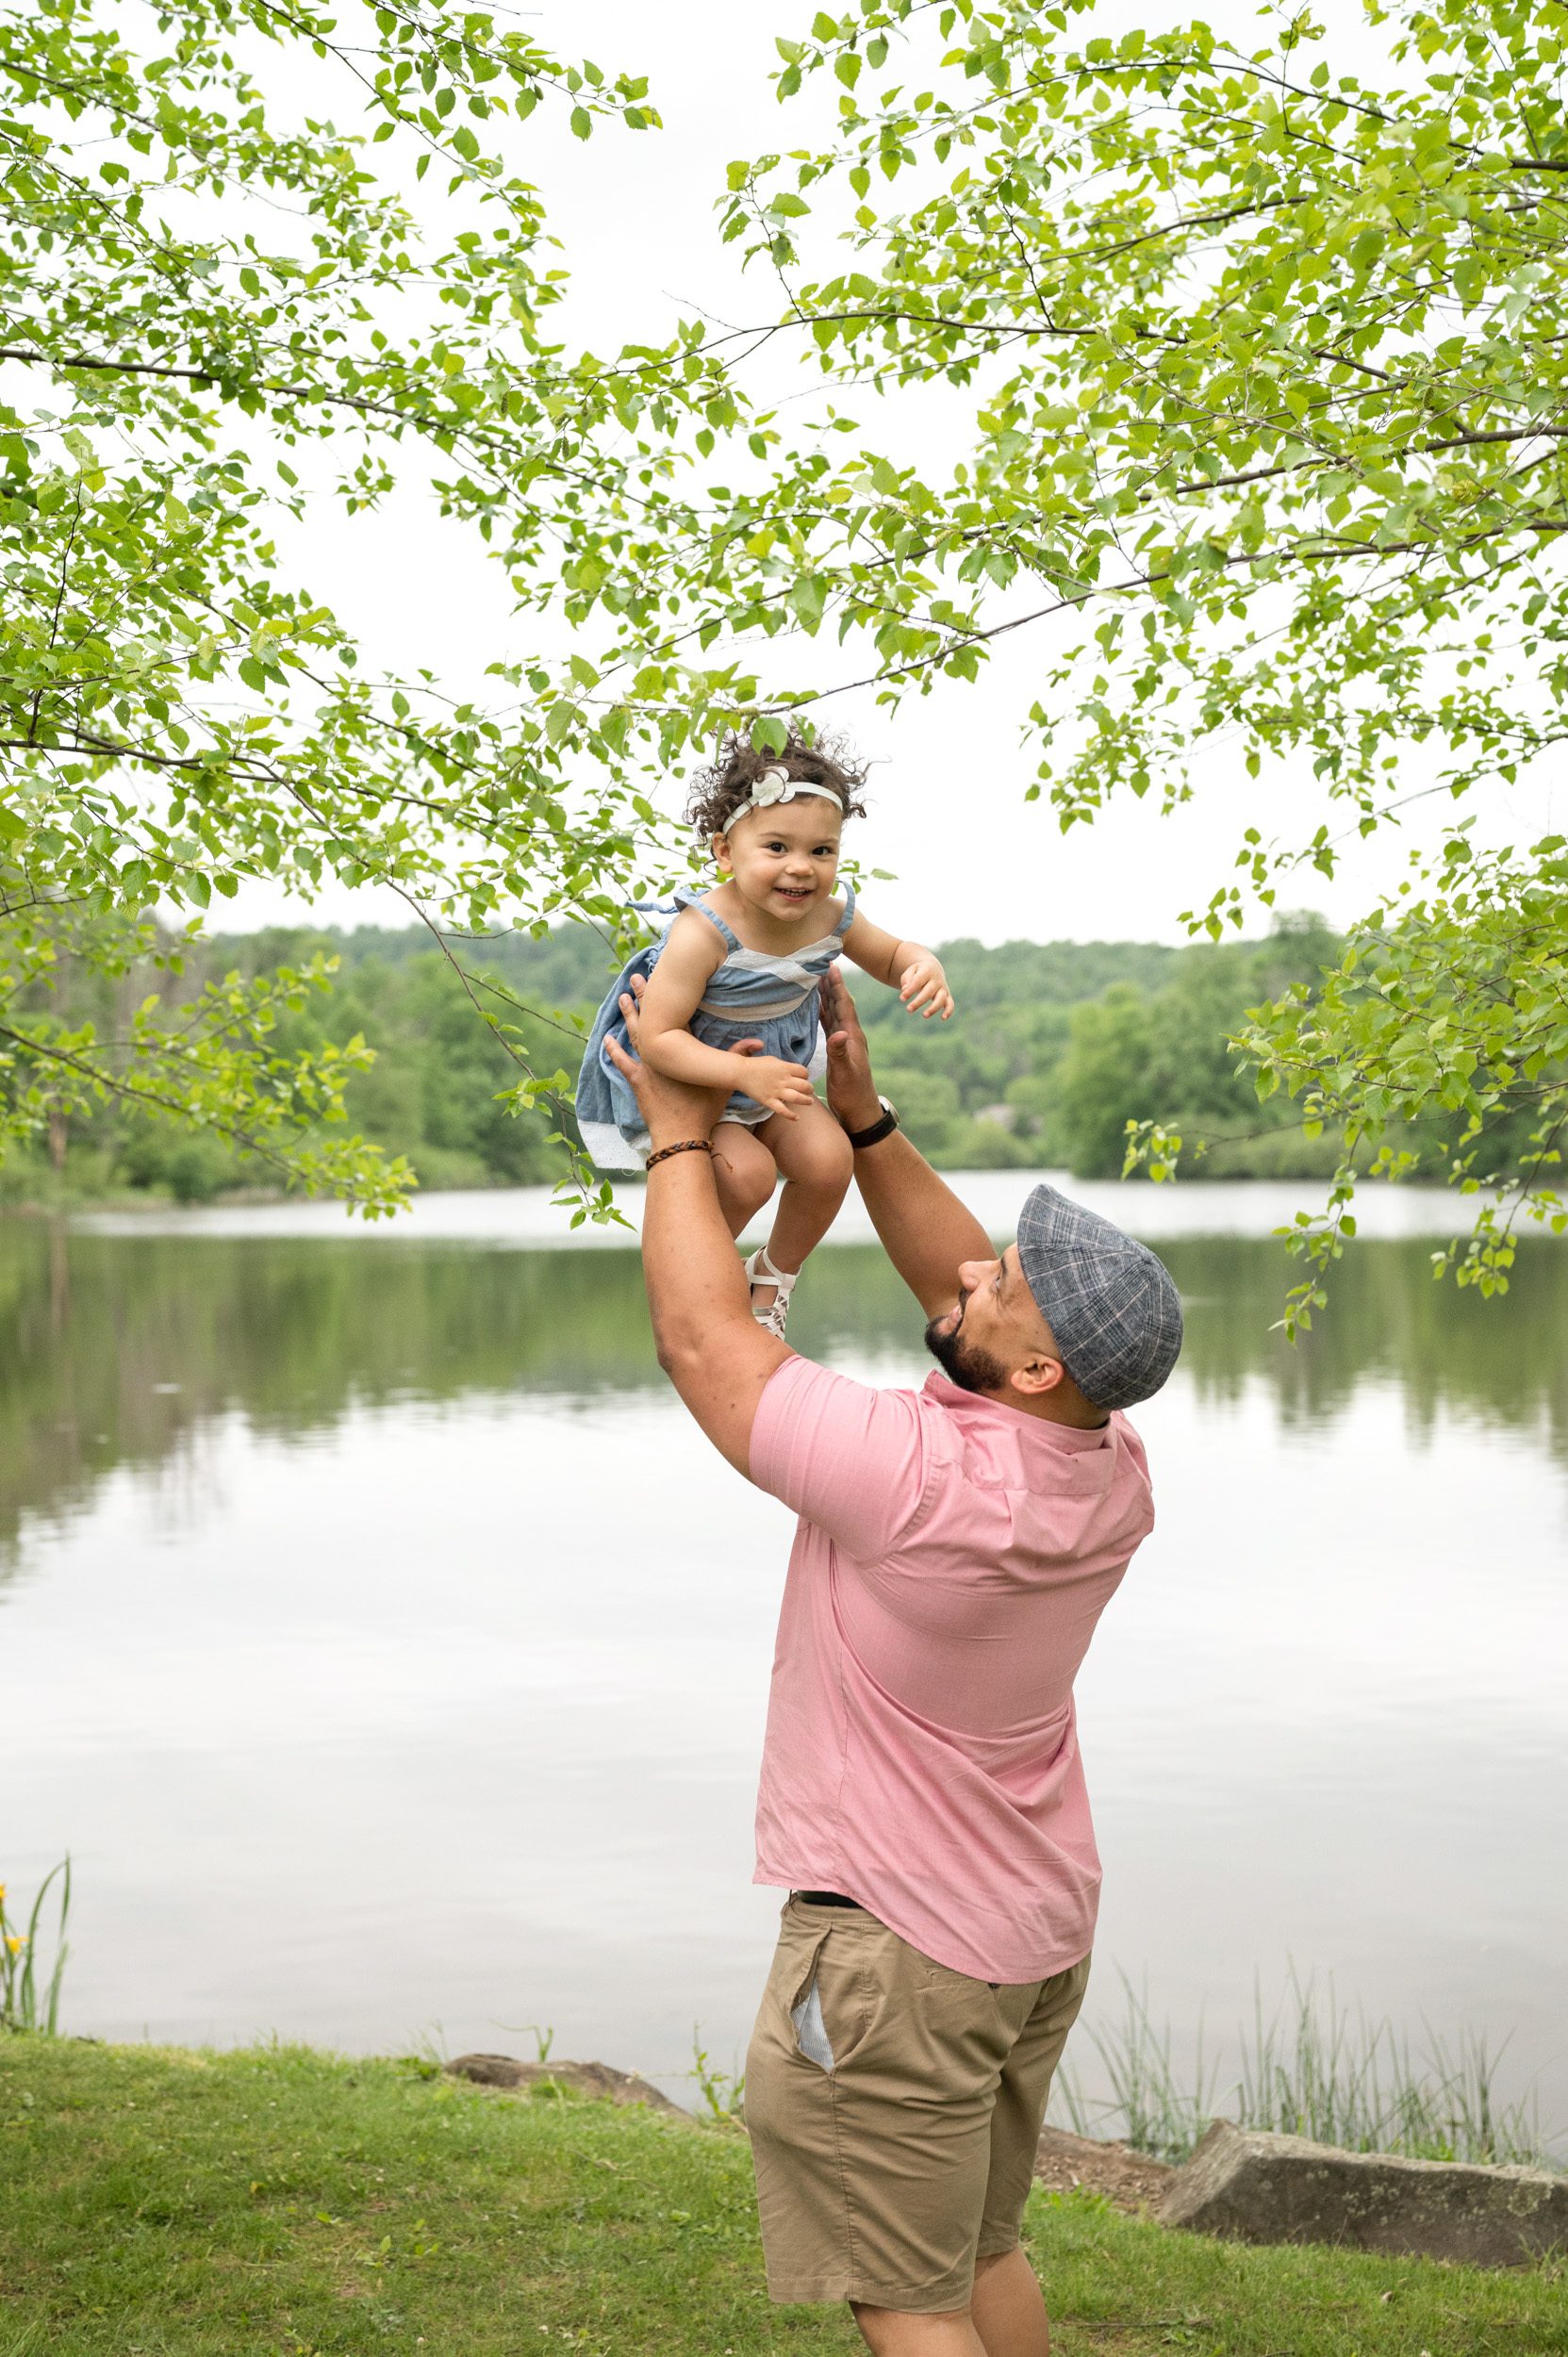 A father flying his young daughter up in the air in front of a lake during a family photoshoot